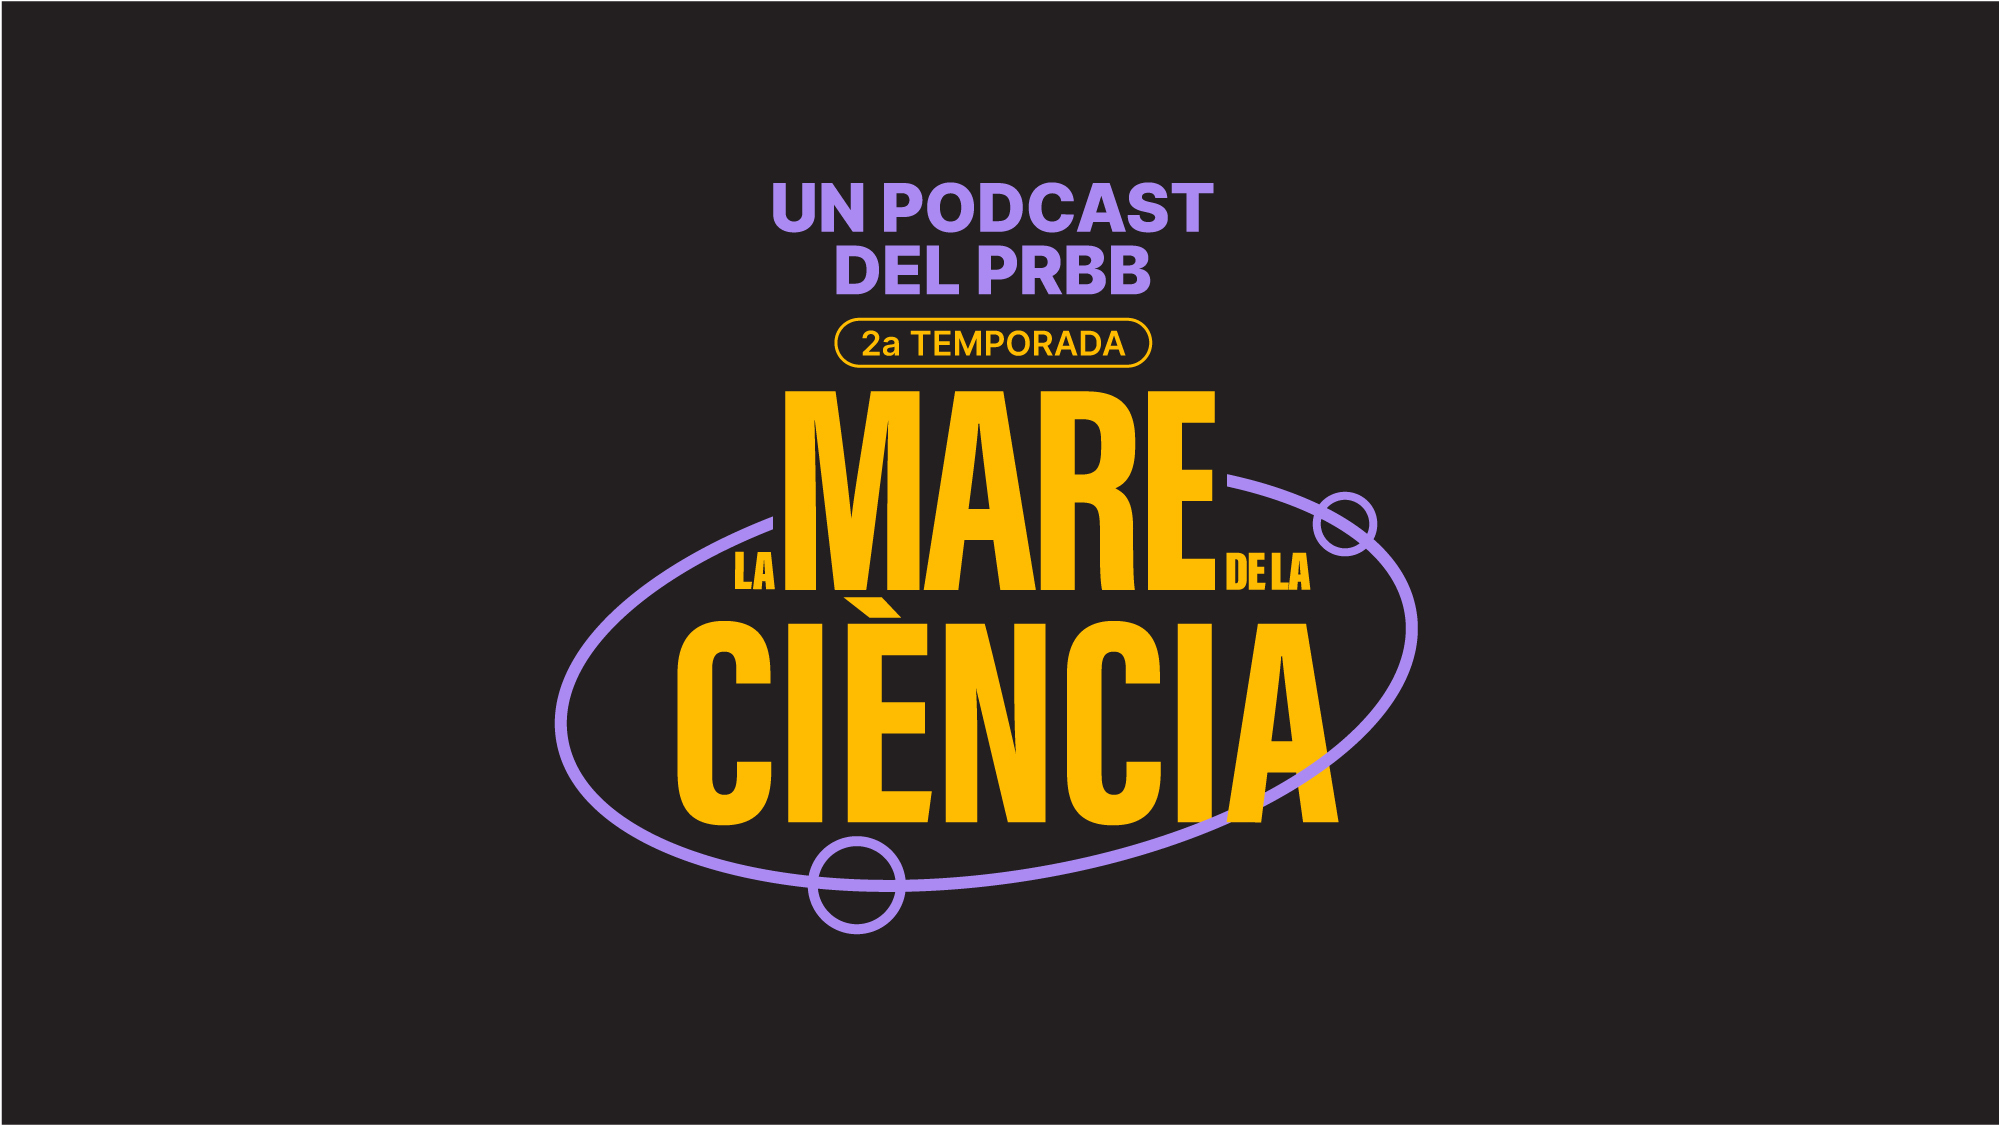 ‘La Mare de la Ciència’ returns with six new stories to explain the research being carried out at the PRBB